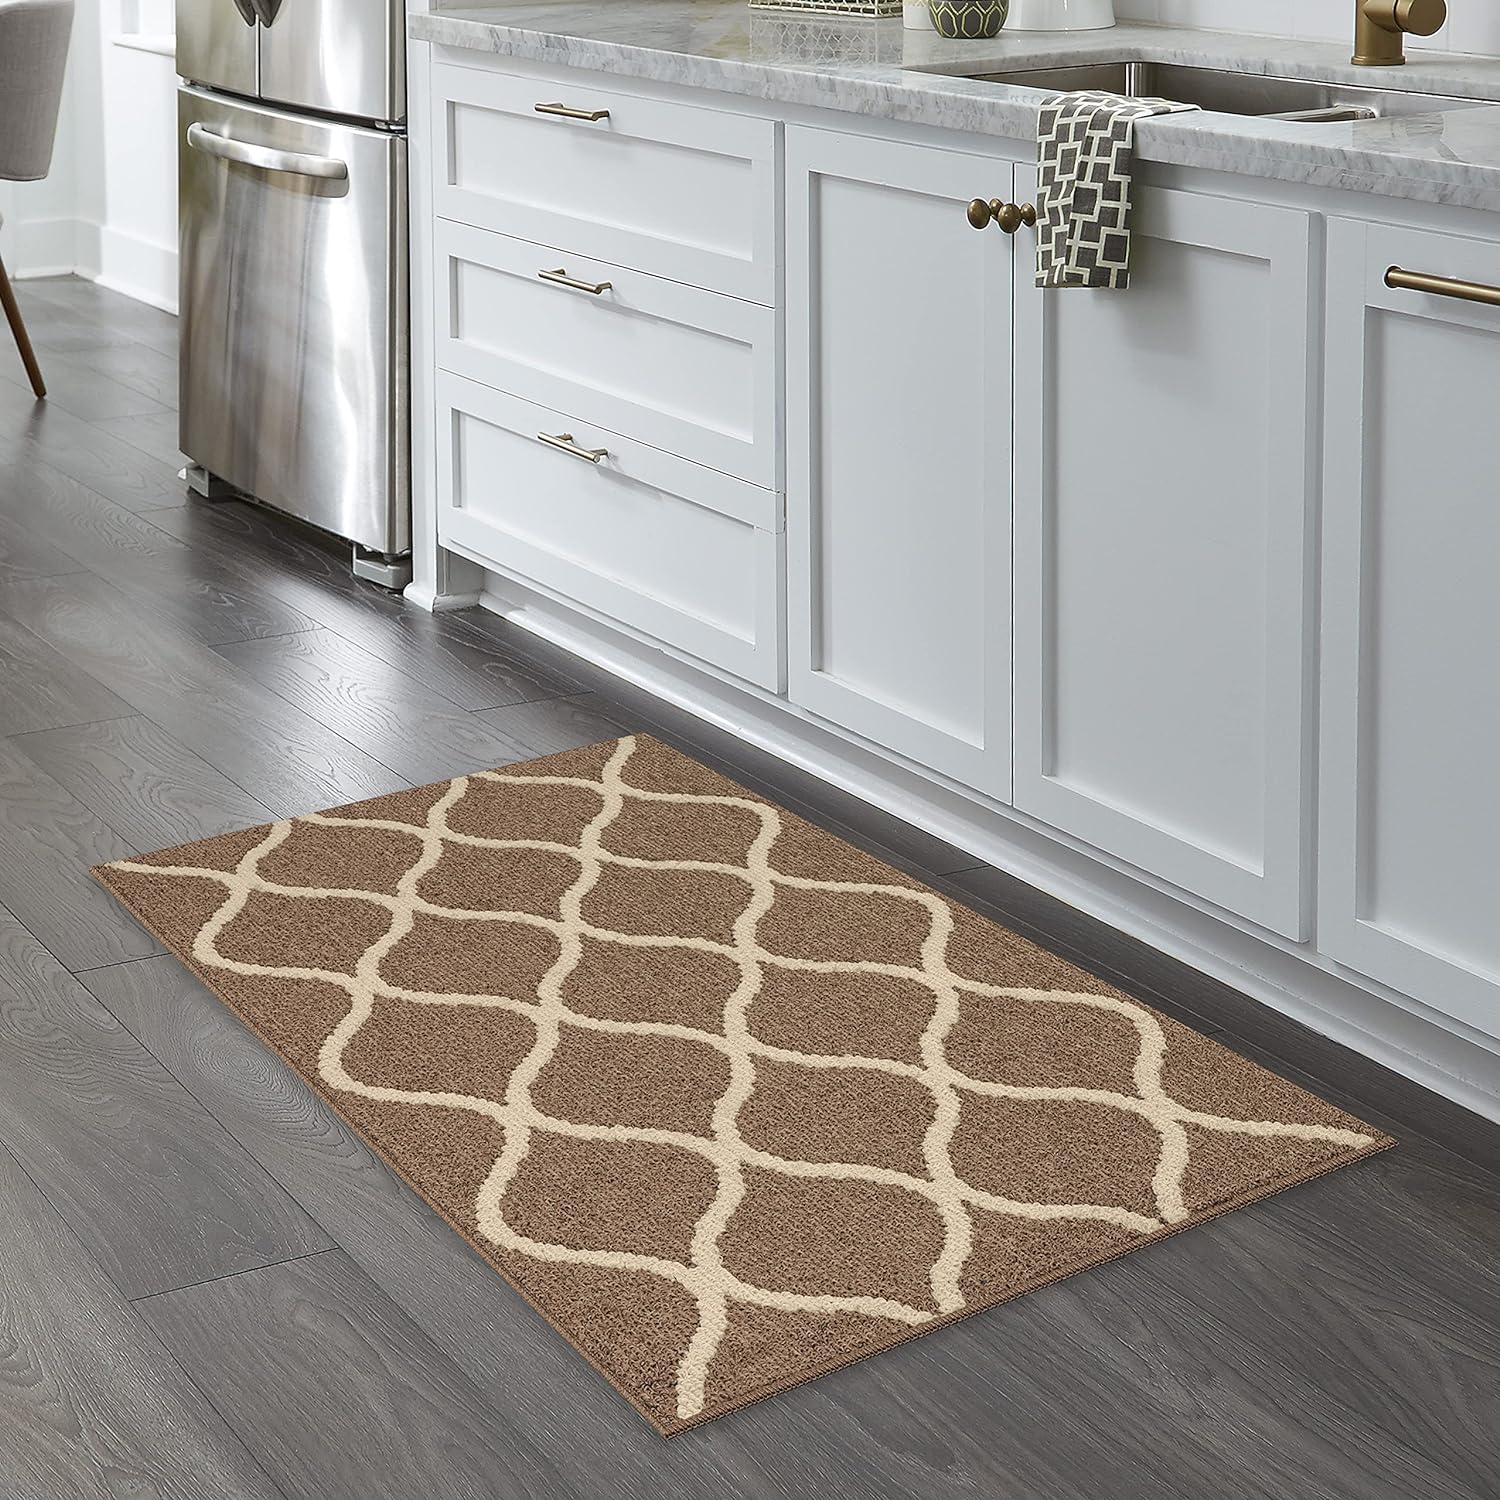 I hardly leave a review but this rug was better than expected! Even my daughter, who is picky, said it felt nice and soft when she stepped on it. It also matched the kitchen perfectly. This rug is well made, fits as stated, and appears to be durable. I was so impressed, I just ordered 2 of a different size to place in entryways! Love the design and the color choices available! You won't be disappointed and the cost for this size was great value! 5 stars